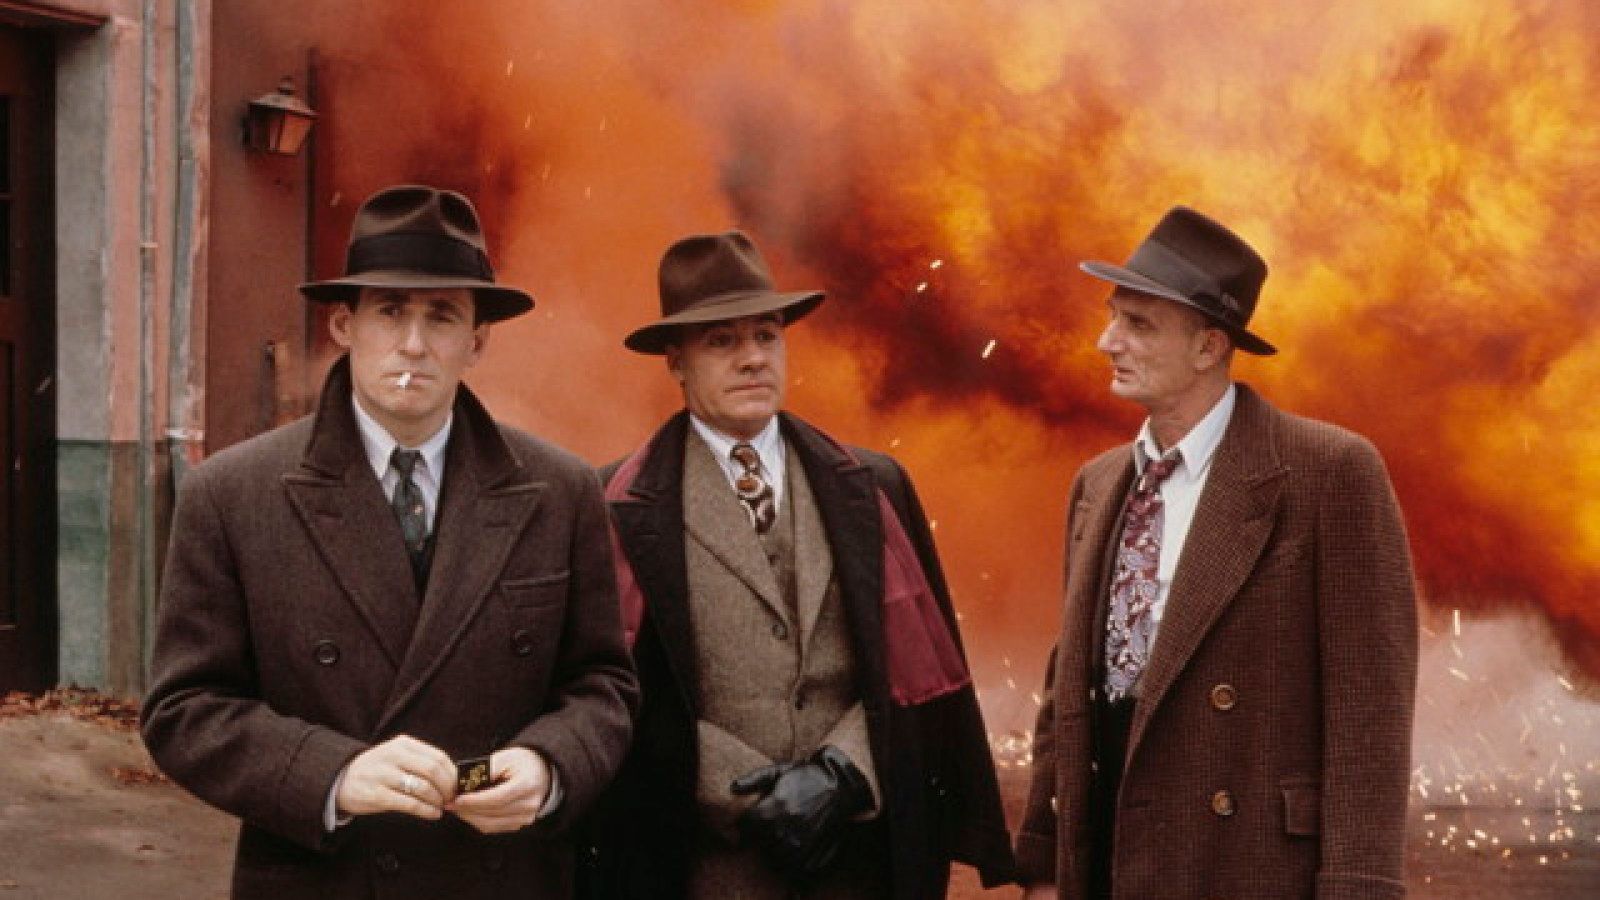 big explosion behind Reagan and associates, in hats and suits